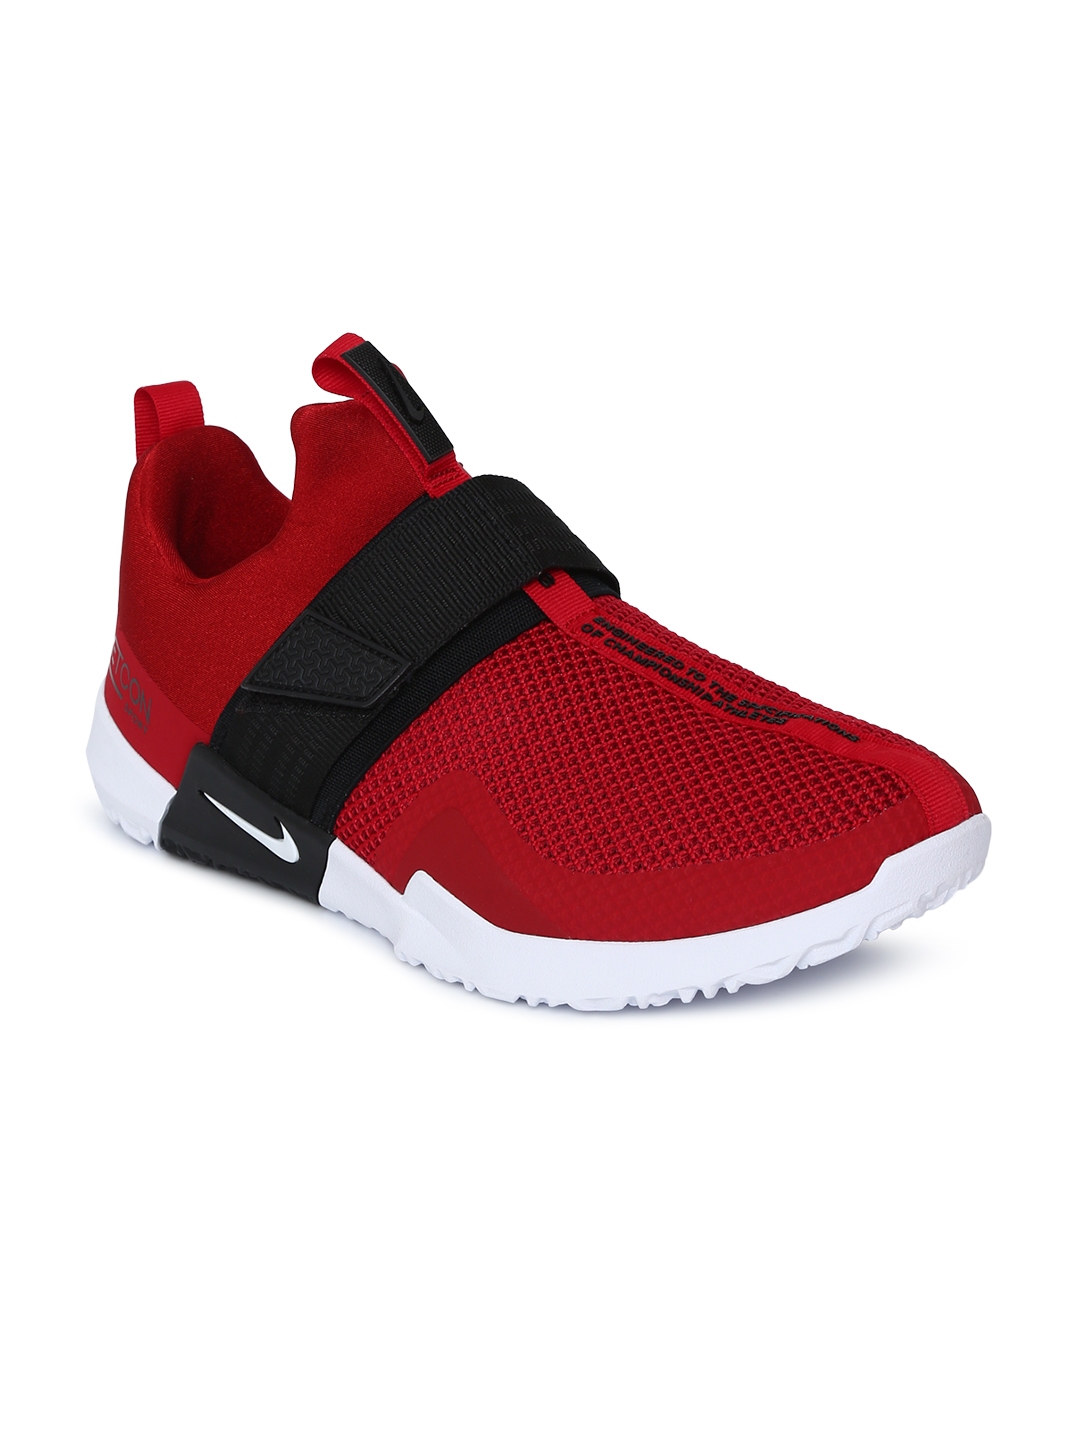 mens red training shoes